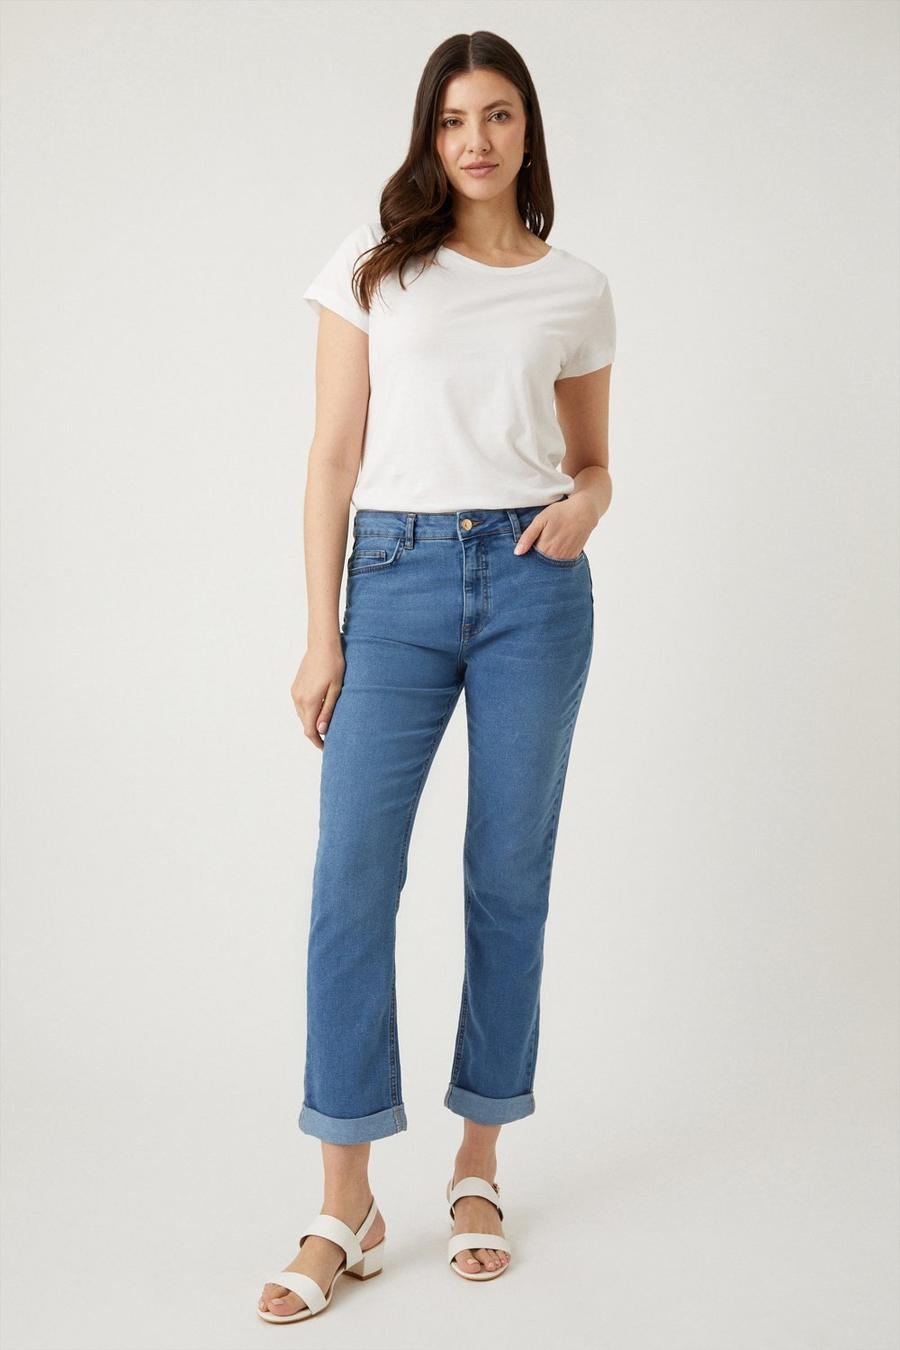 Scarlet Roll Up Jeans